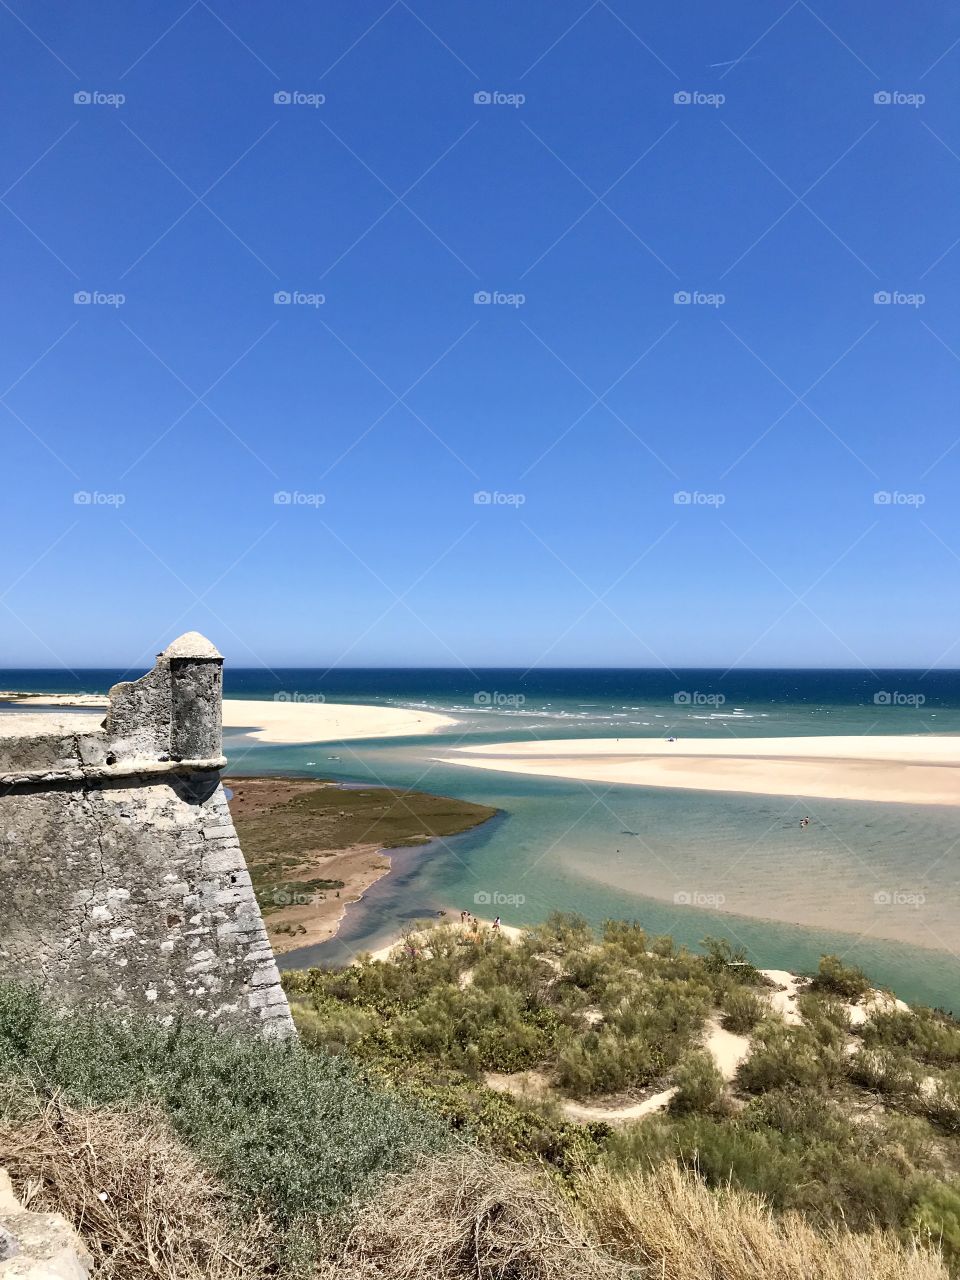 Cacela Velha fortress overlooking the easternmost lagoon of the Ria Formosa (a system of barrier islands that communicates with the sea through six inlets).